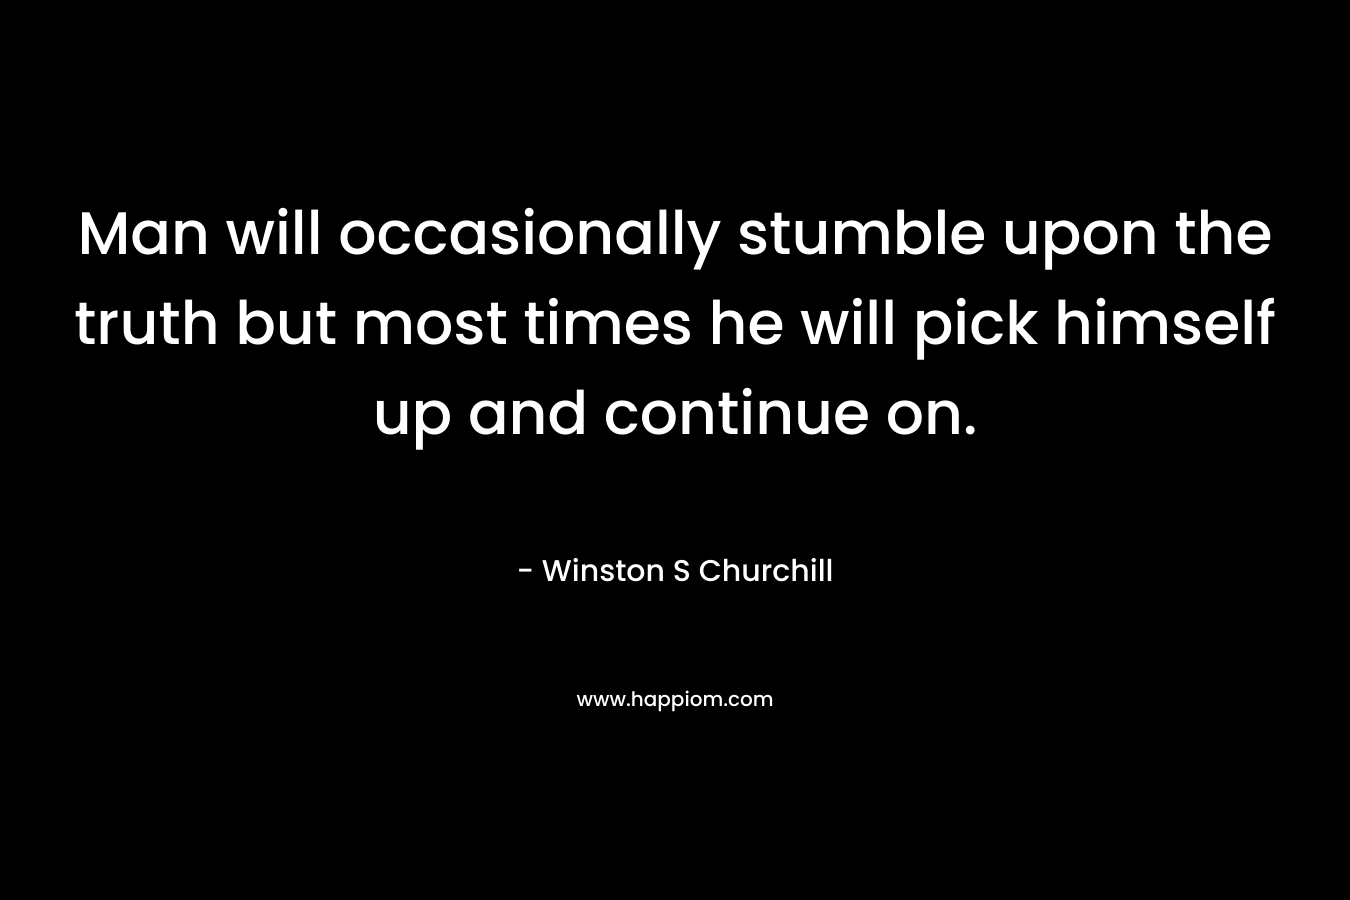 Man will occasionally stumble upon the truth but most times he will pick himself up and continue on. – Winston S Churchill